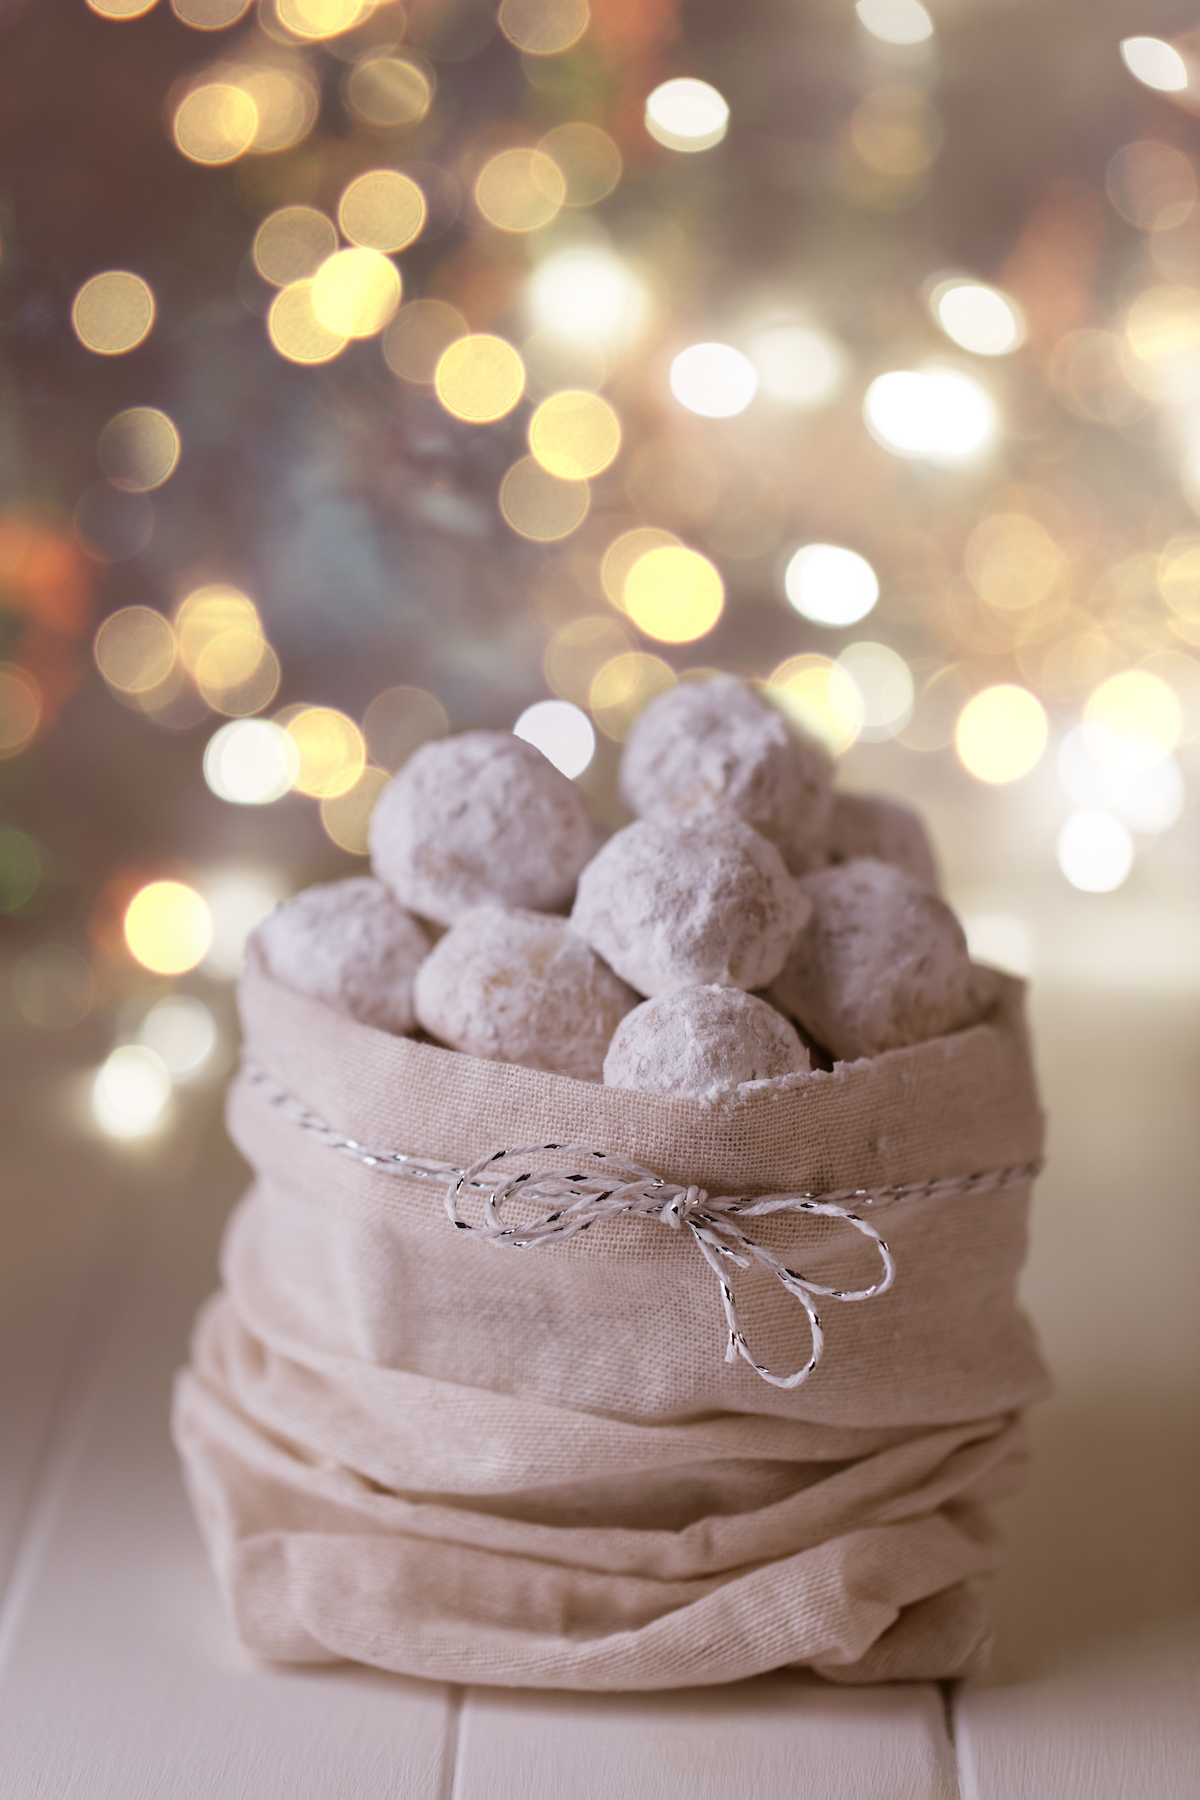 Vegan snowball cookies in a cute sack with Christmas lights in the background.